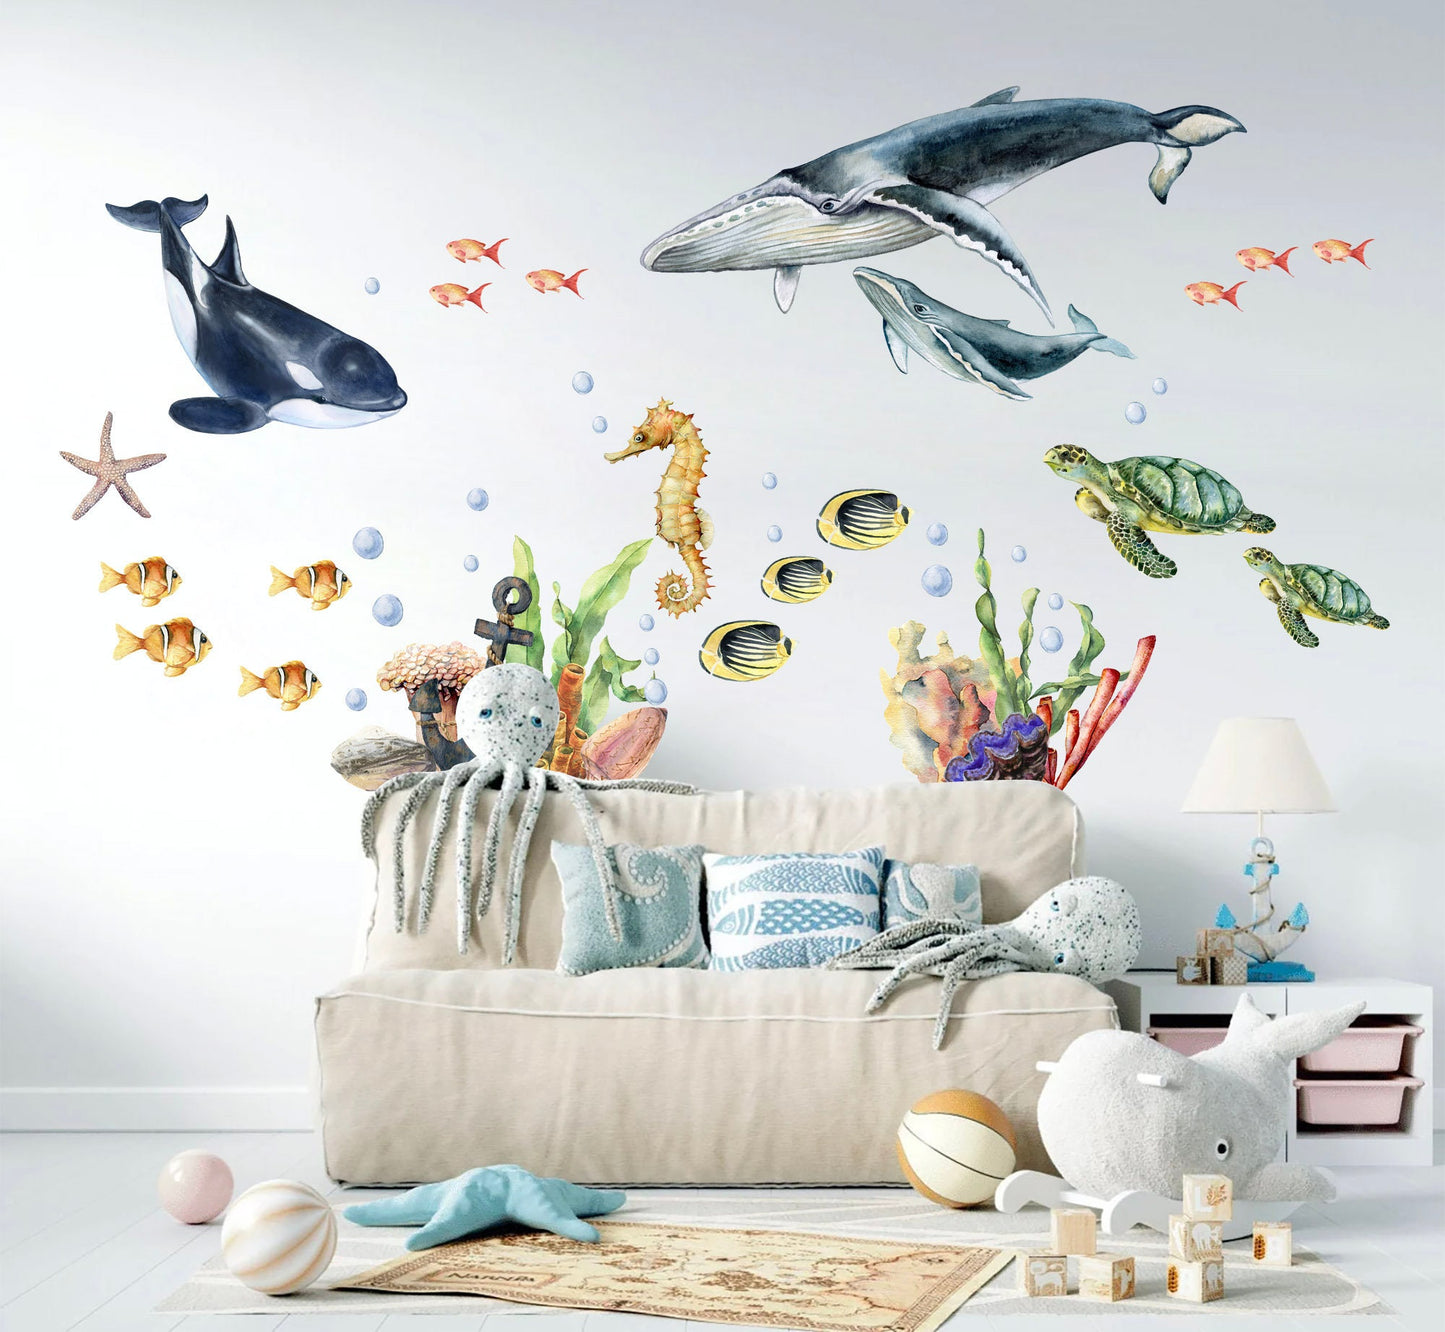 Marine Life Underwater Wall Decal - Whale Dolphin Sea Turtle Seahorse - Removable Peel and Stick - BR145